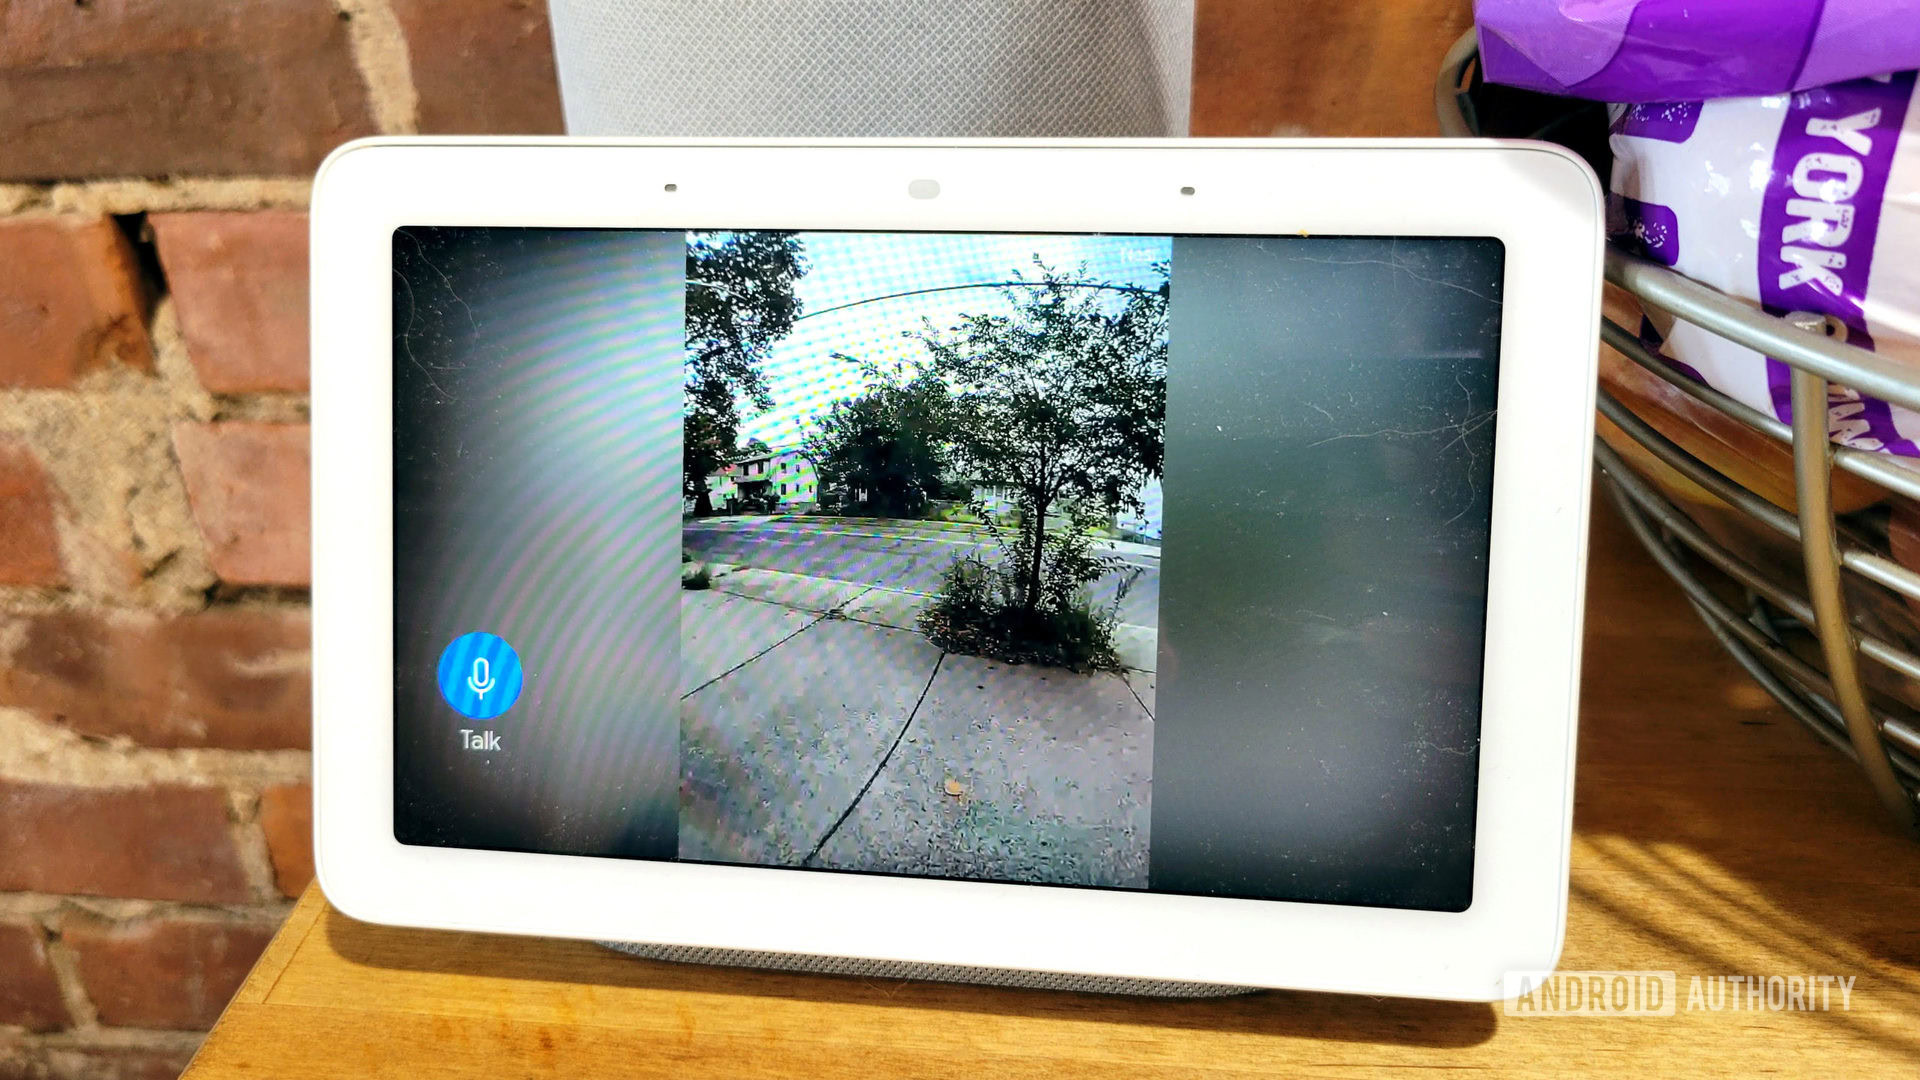 Google Nest Doorbell Review Day Time Image on Google Home Hub